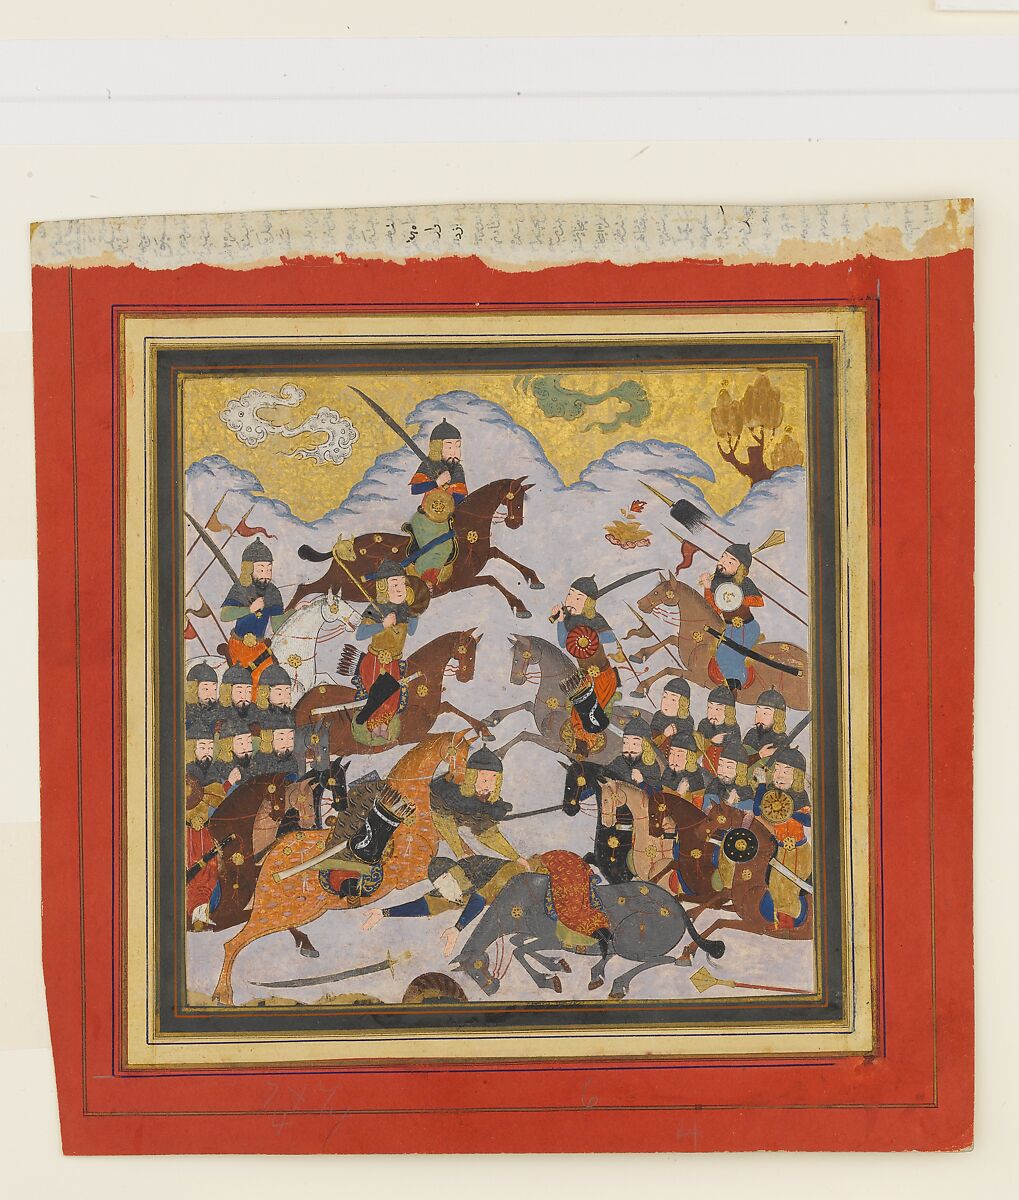 "Rustam Seizes Afrasiyab by the Girdle and Lifts him from the Saddle", Folio from a Shahnama (Book of Kings), Abu&#39;l Qasim Firdausi (Iranian, Paj ca. 940/41–1020 Tus), Main support: Ink, opaque watercolor, gold on paper
Margins: Ink and gold on dyed paper 